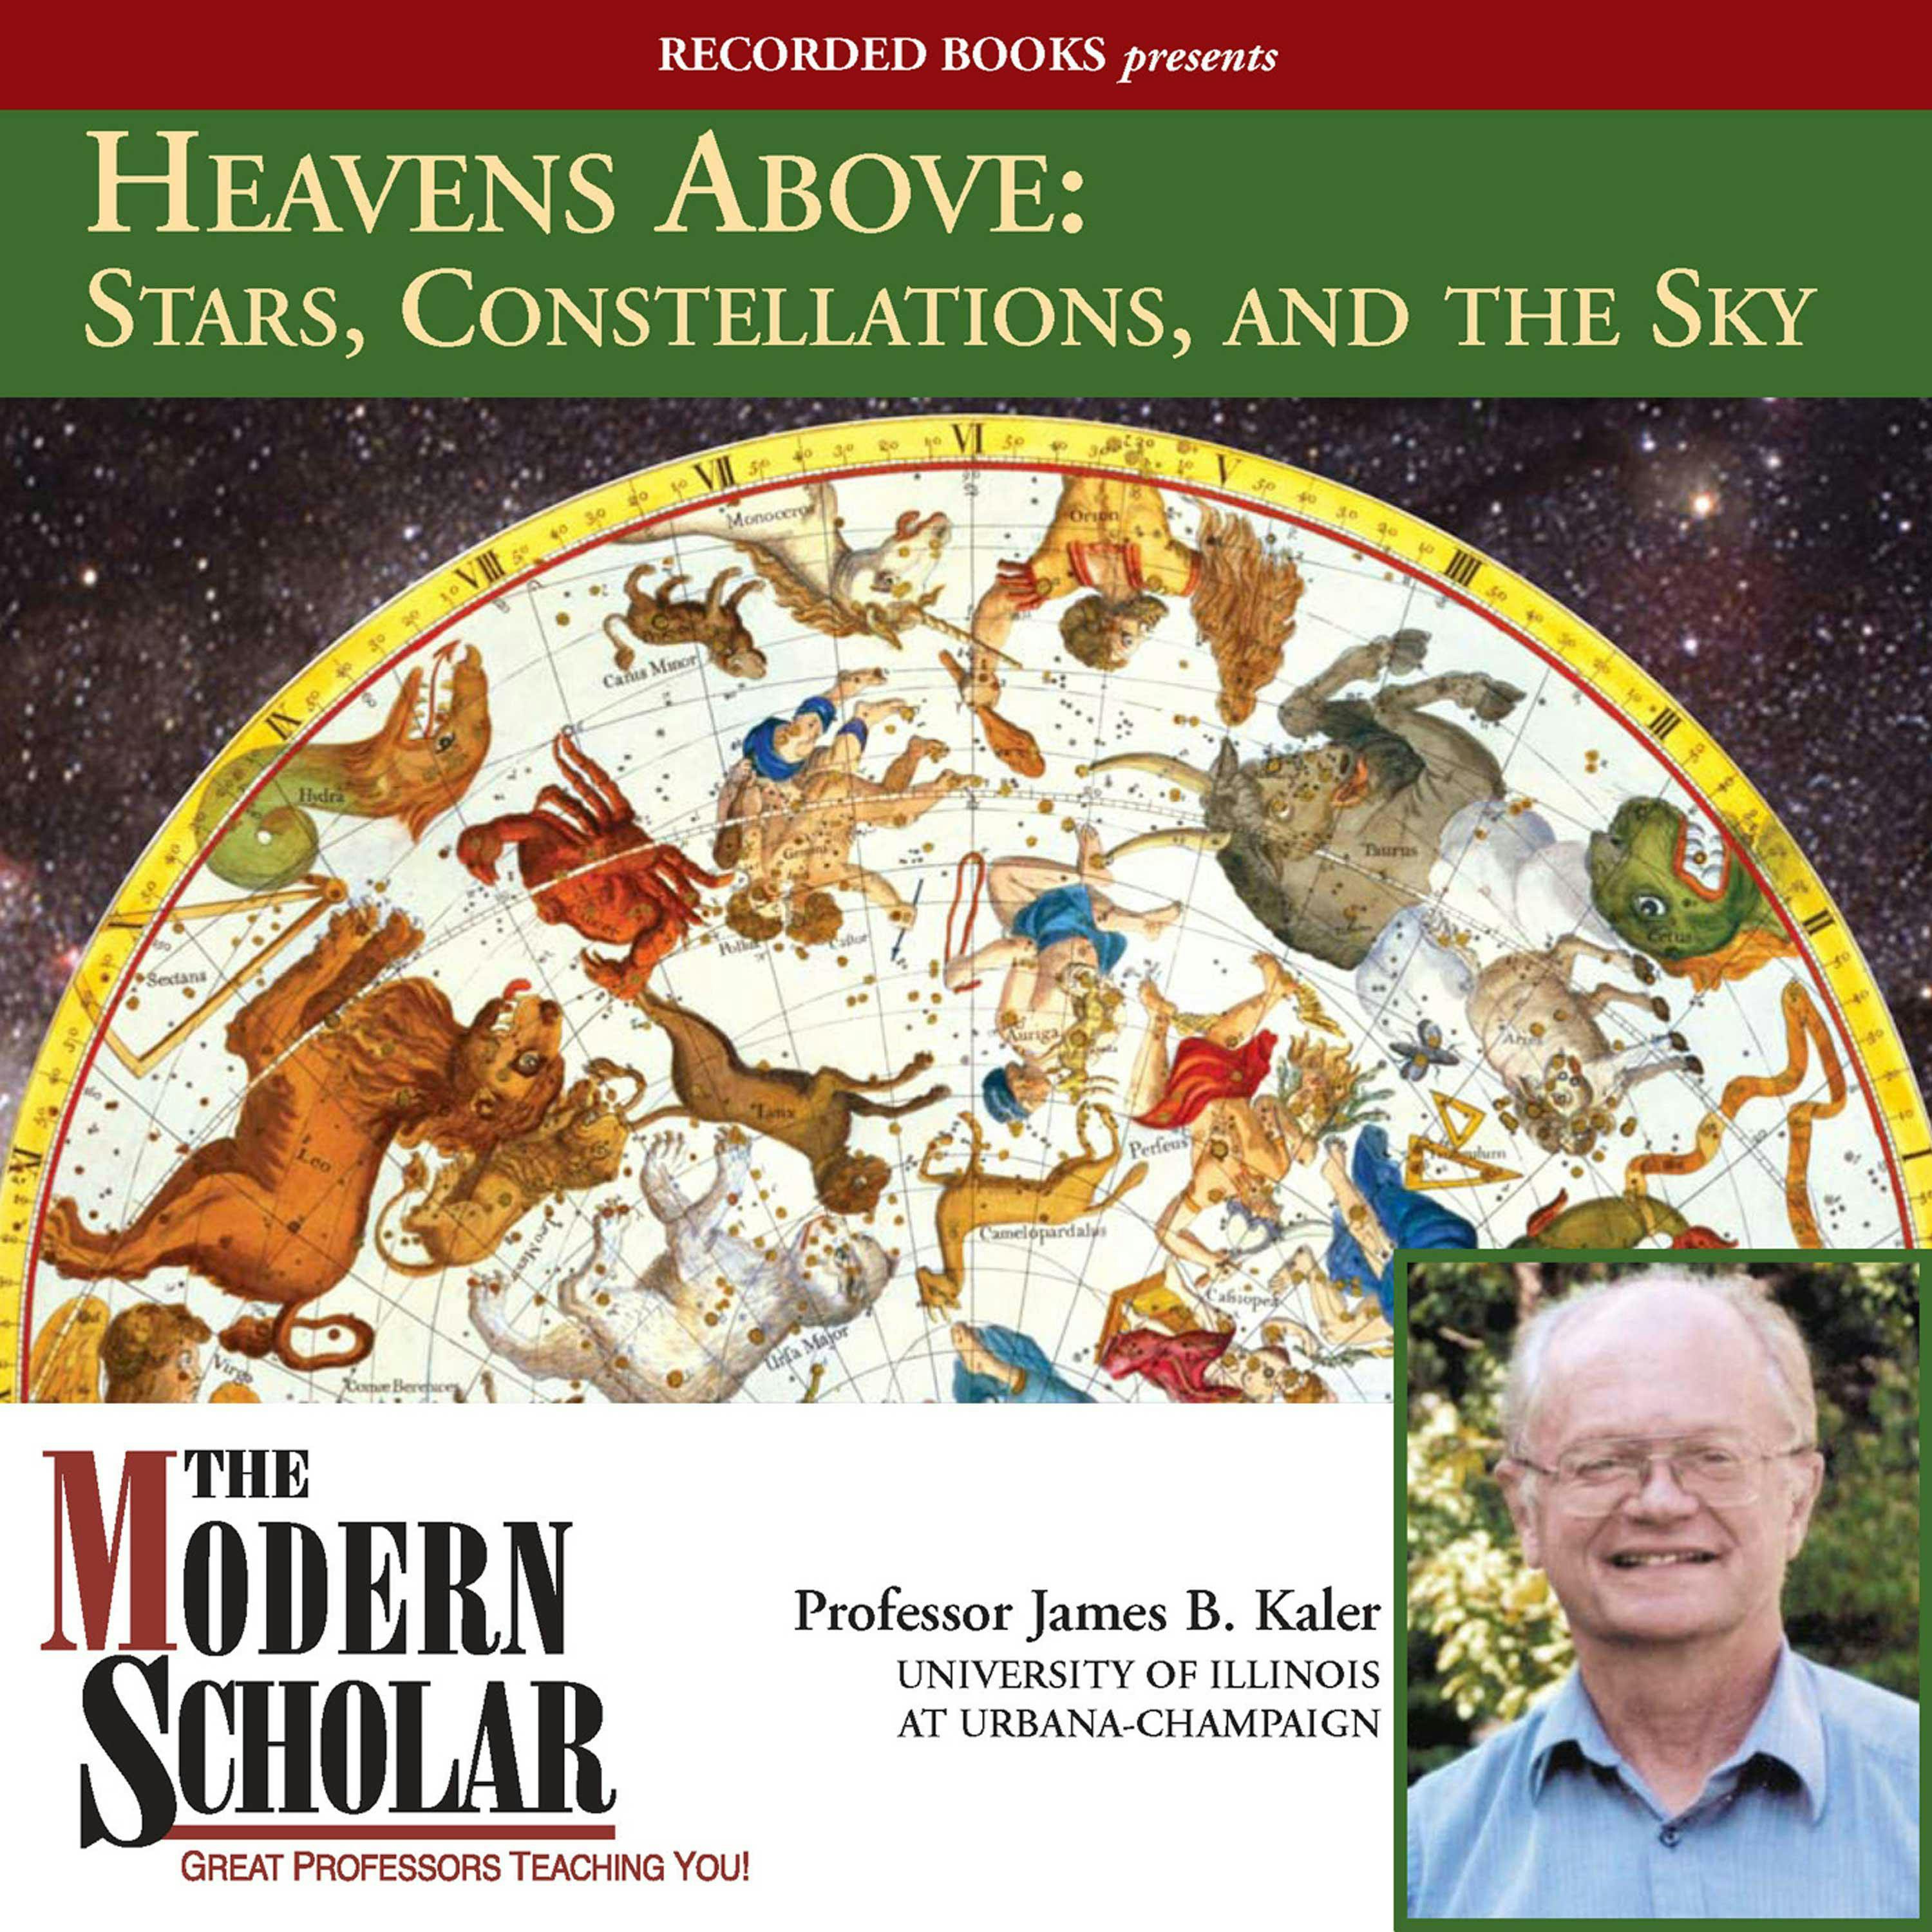 Heavens Above: Stars, Constellations, and the Sky - James Kaler